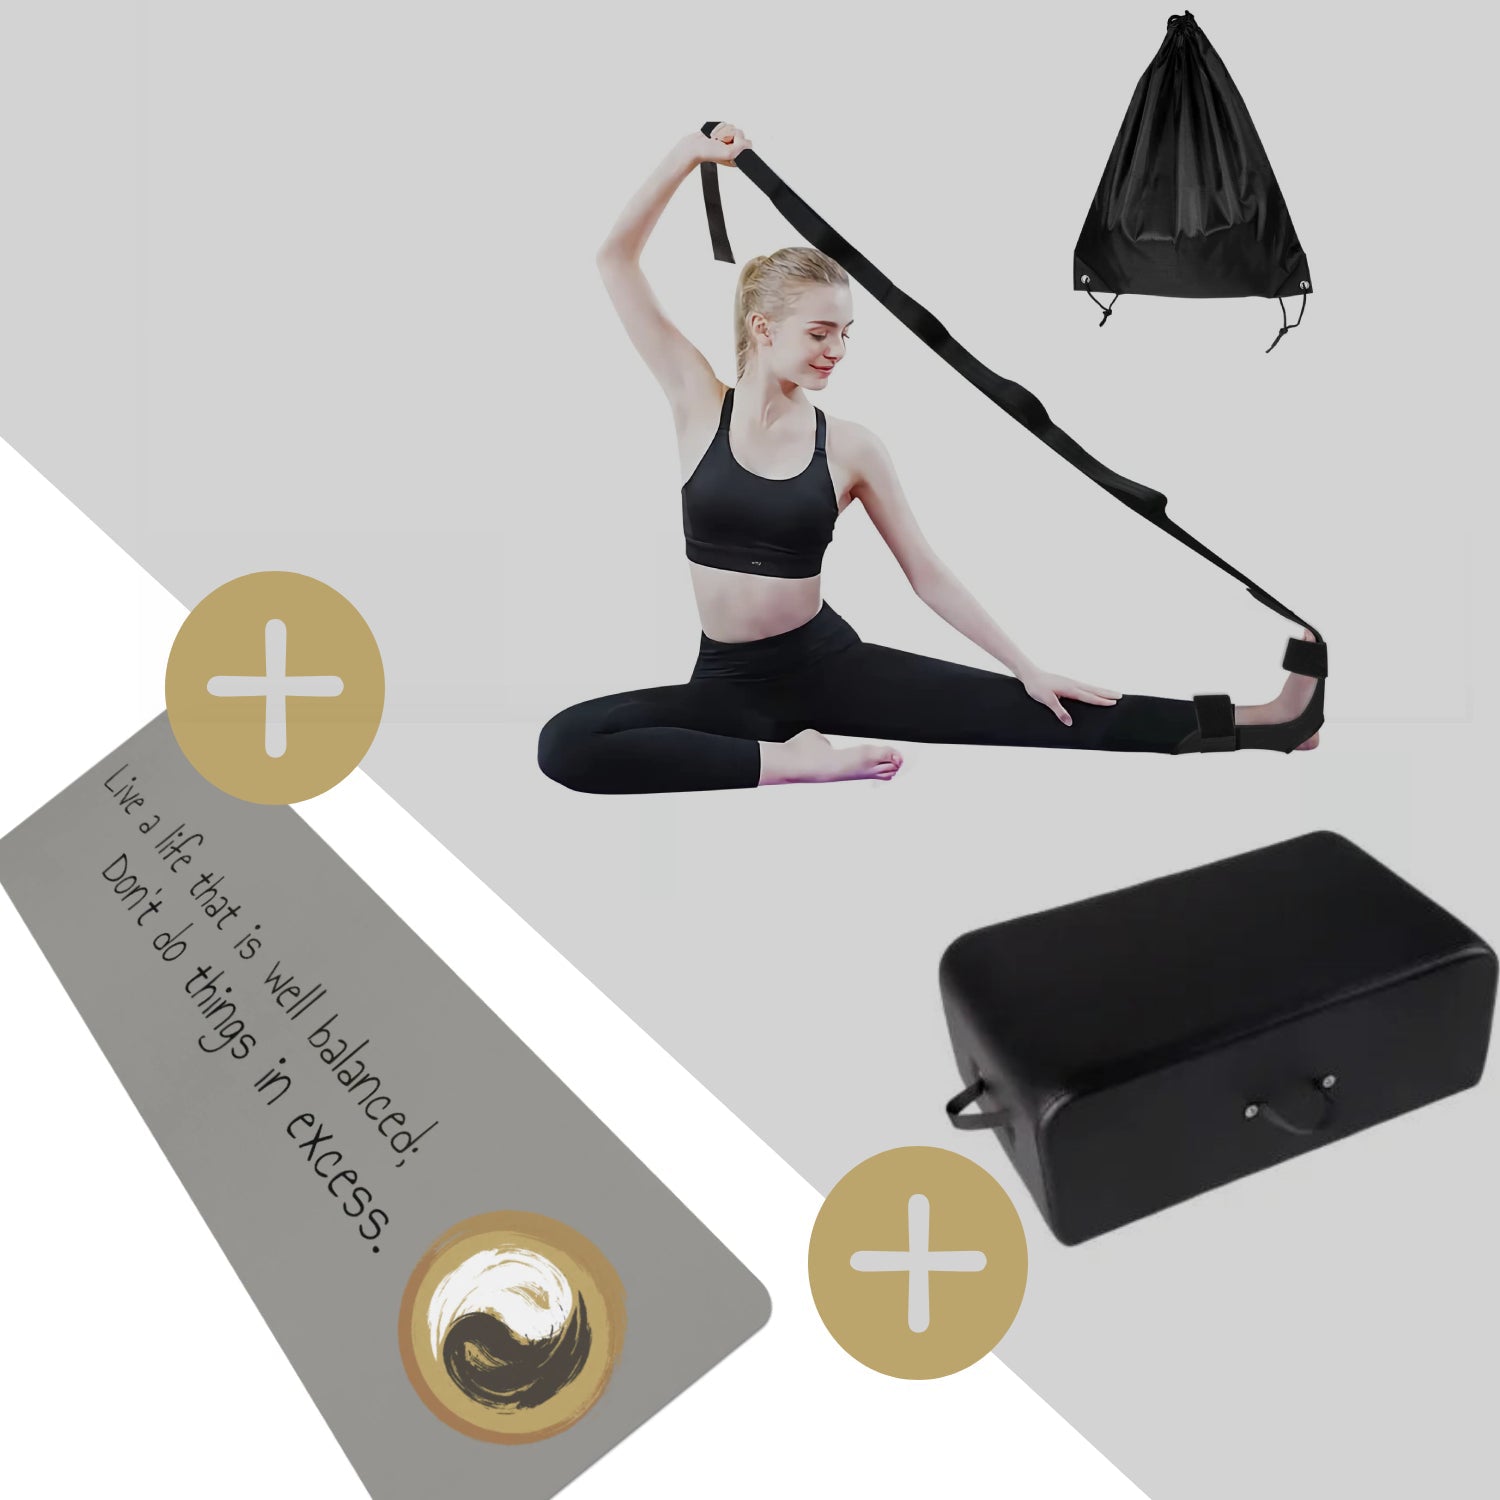 Pilates Aluminum Yoga Bed Yoga and Meditation Supplies in the US - Personal  Hour – Personal Hour